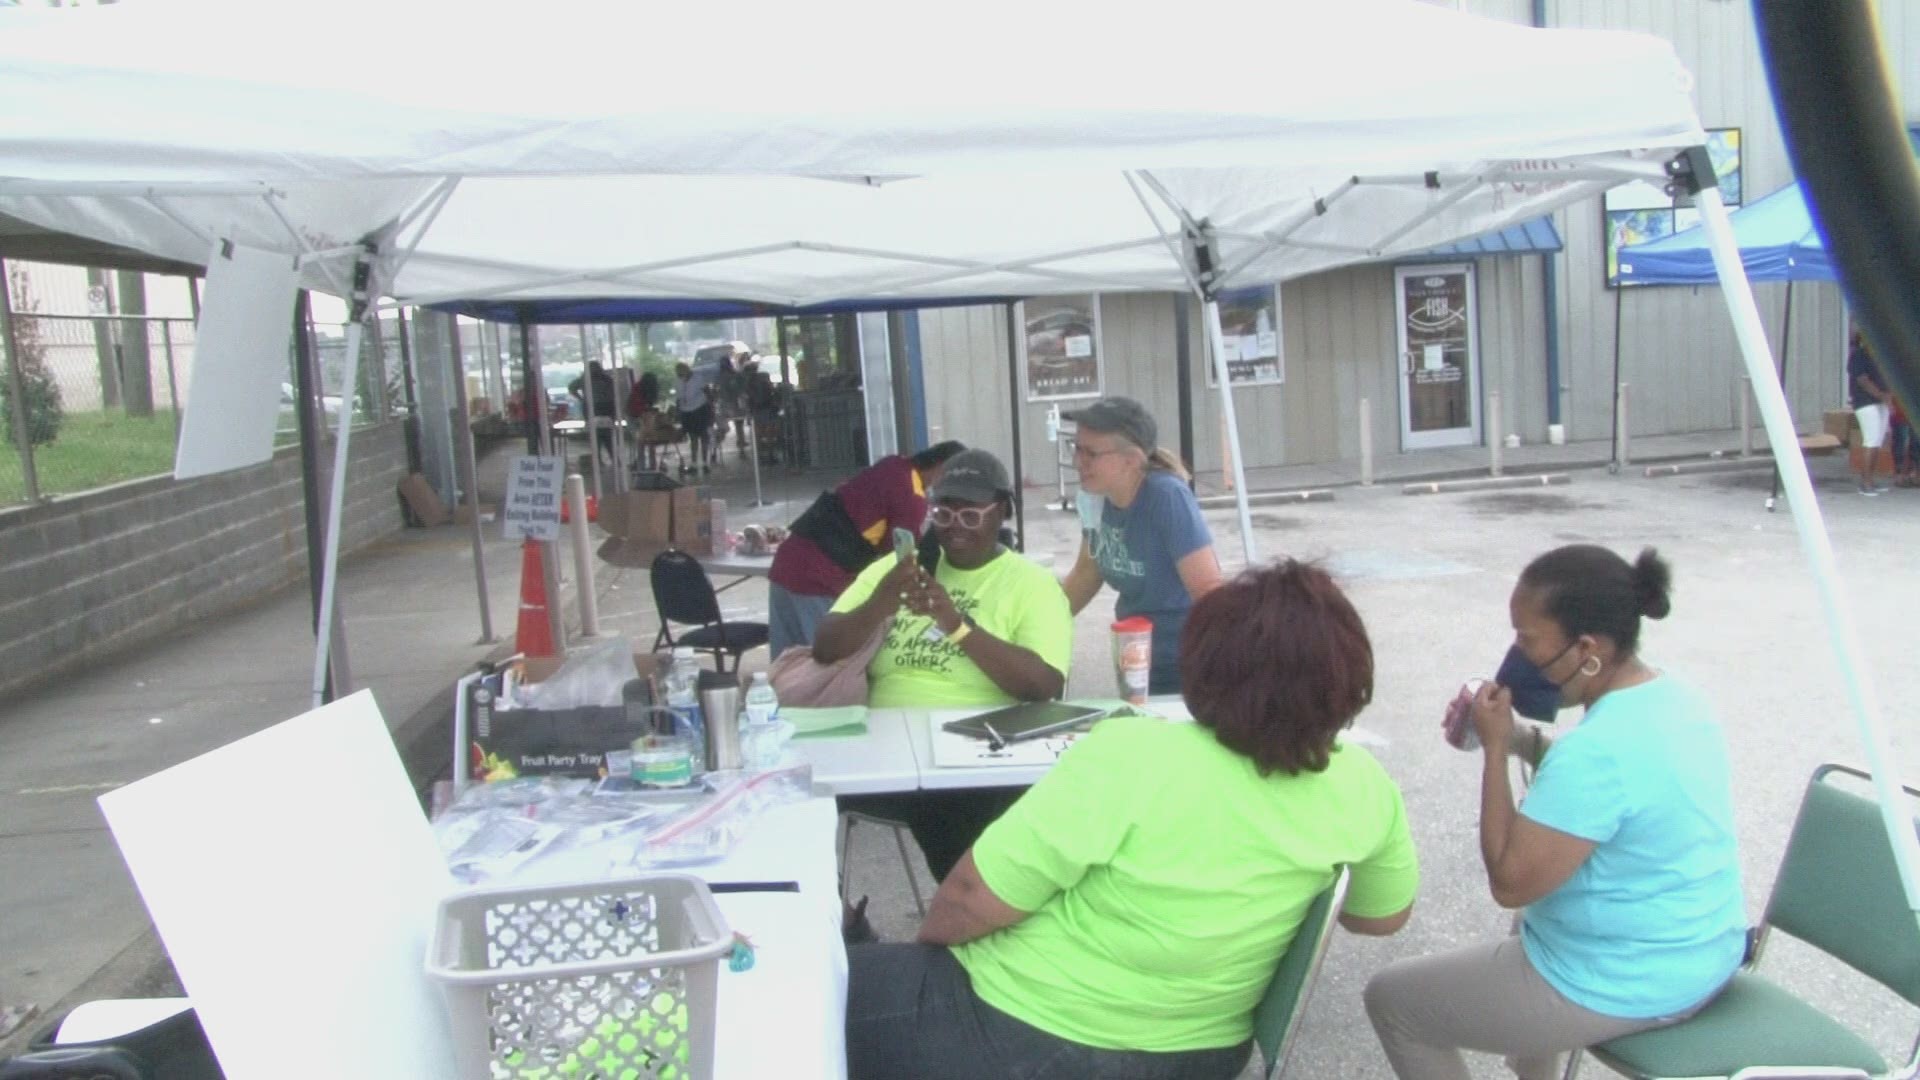 The Fish Pantry in North Knoxville hosted a COVID-19 vaccination clinic on Saturday, in partnership with other health organizations.